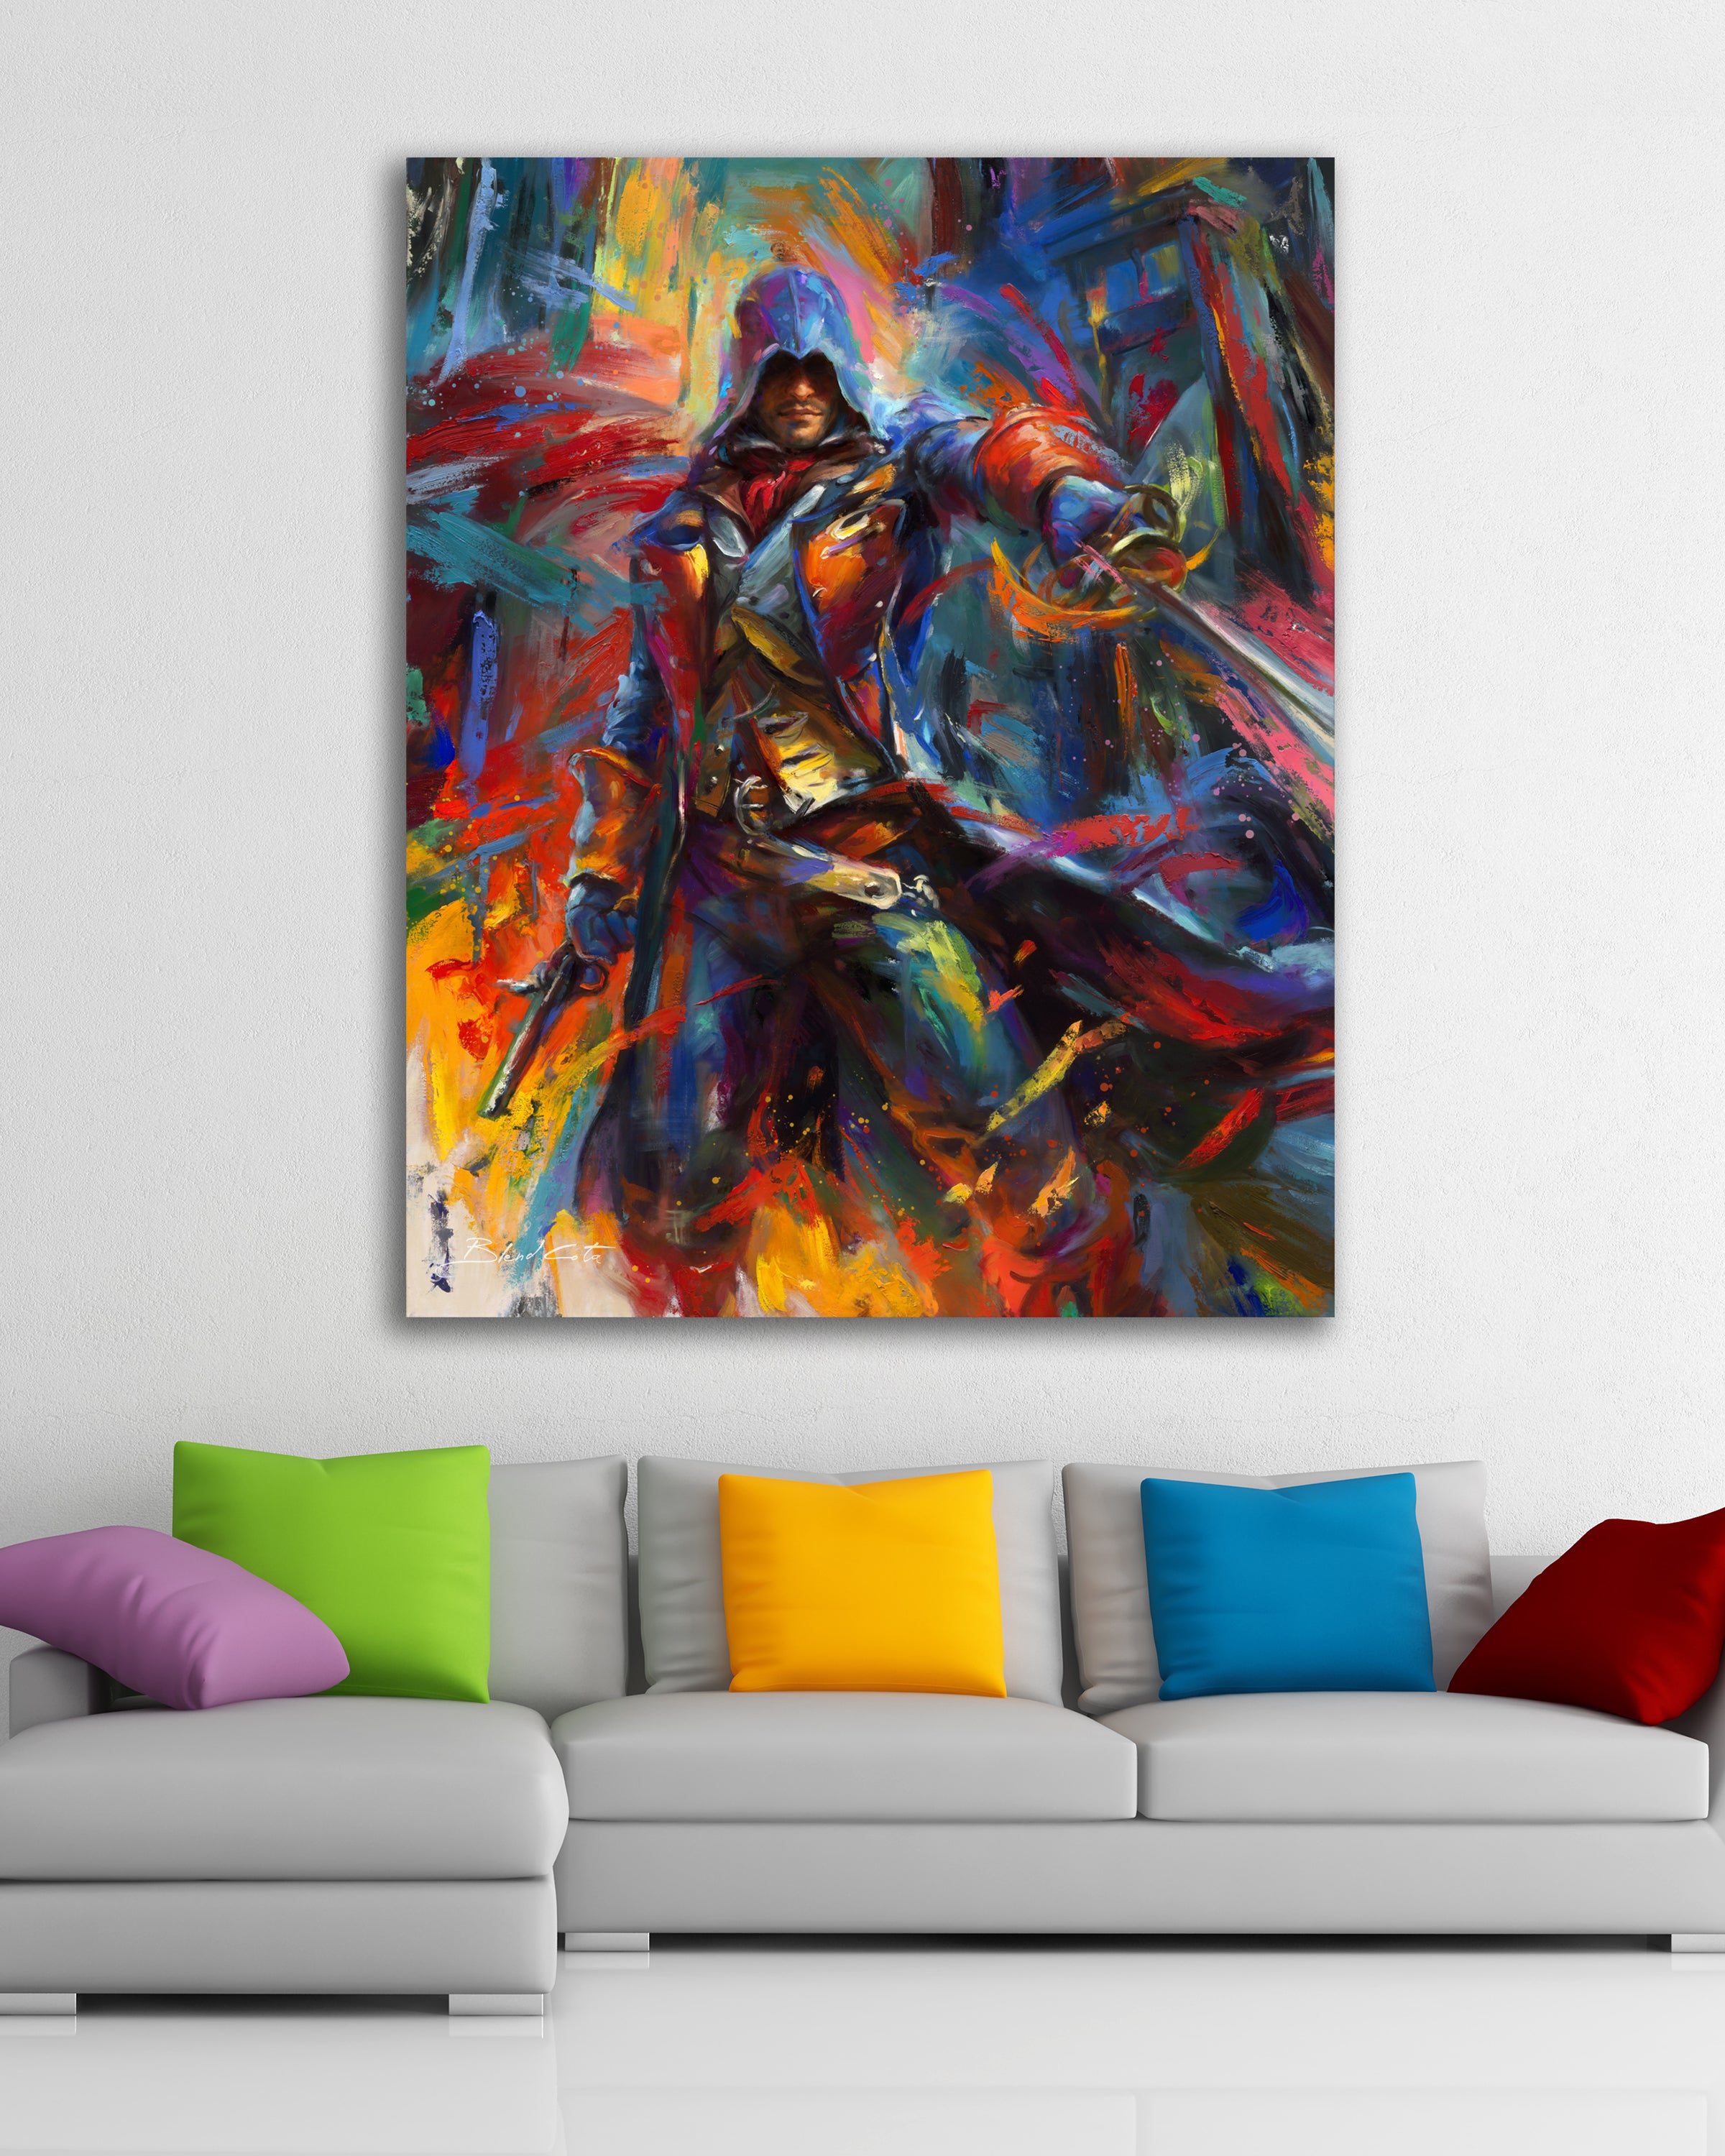 Original oil painting on canvas of Assassin's Creed Arno Dorian of Unity bursting forth with energy and painted with colorful brushstrokes in an expressionistic style in a room setting.